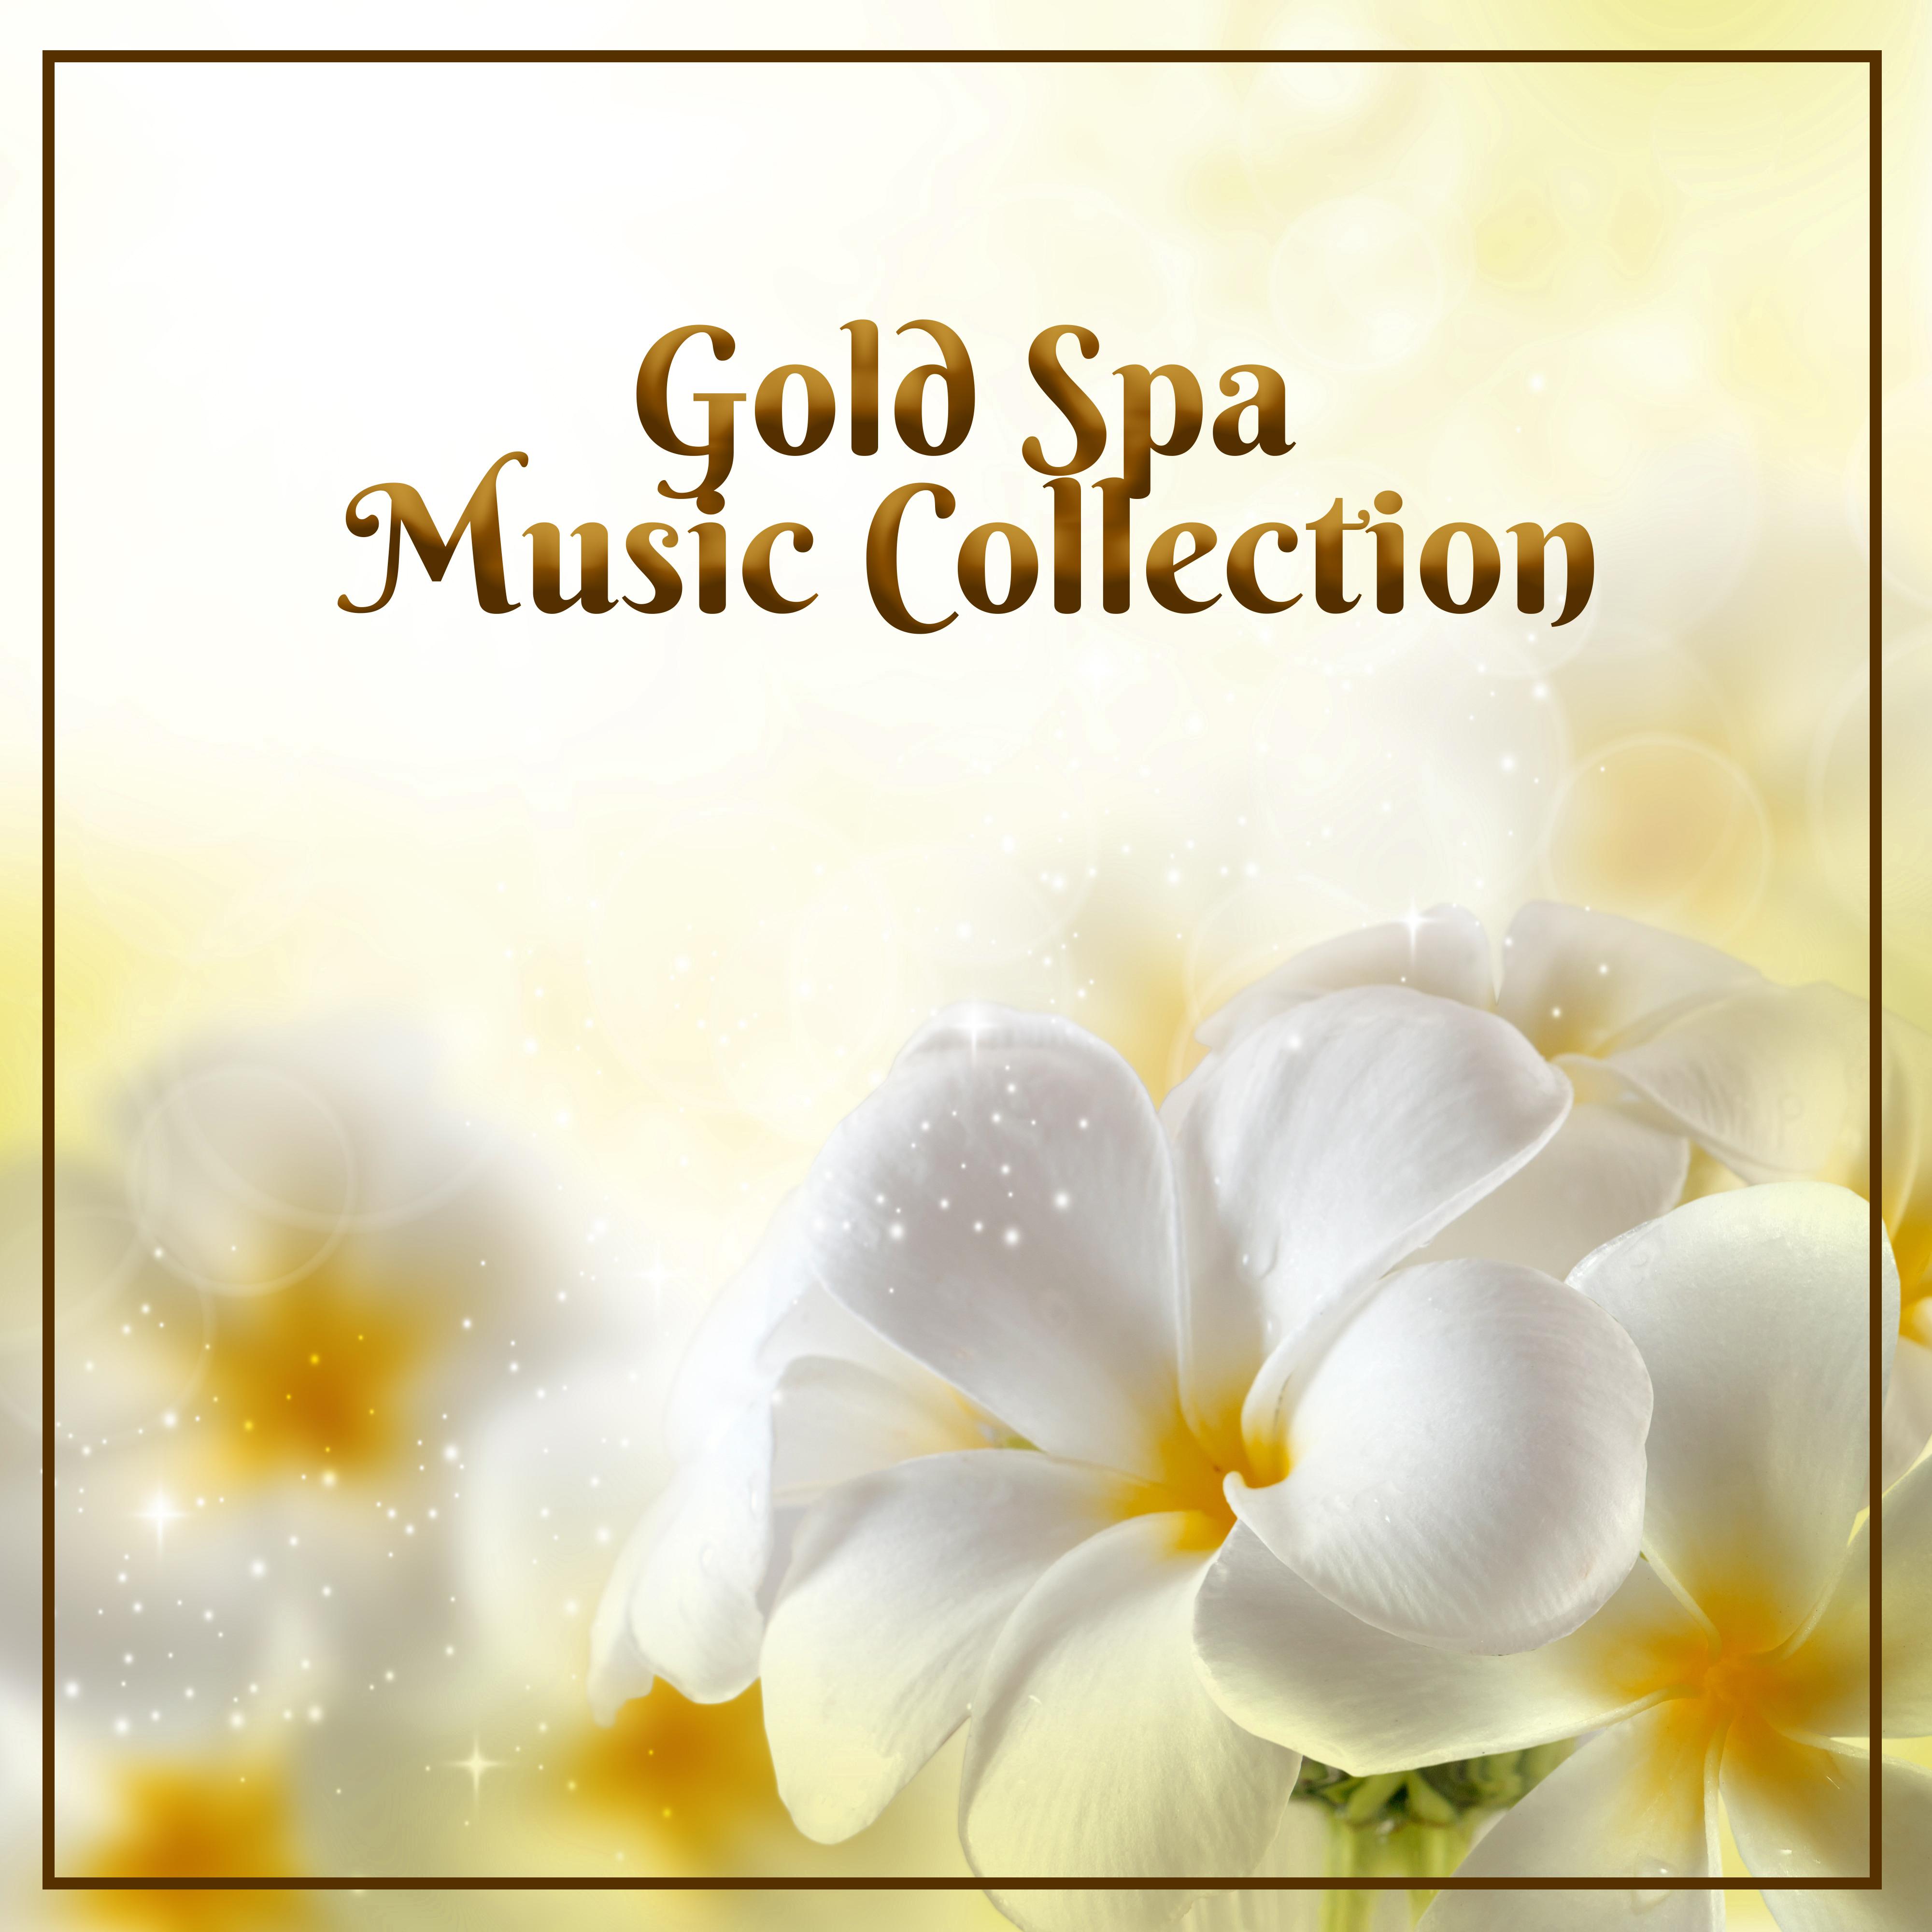 Gold Spa Music Collection – Relaxation Spa, Nature Sounds Collection, Fresh Ne Age Music 2017